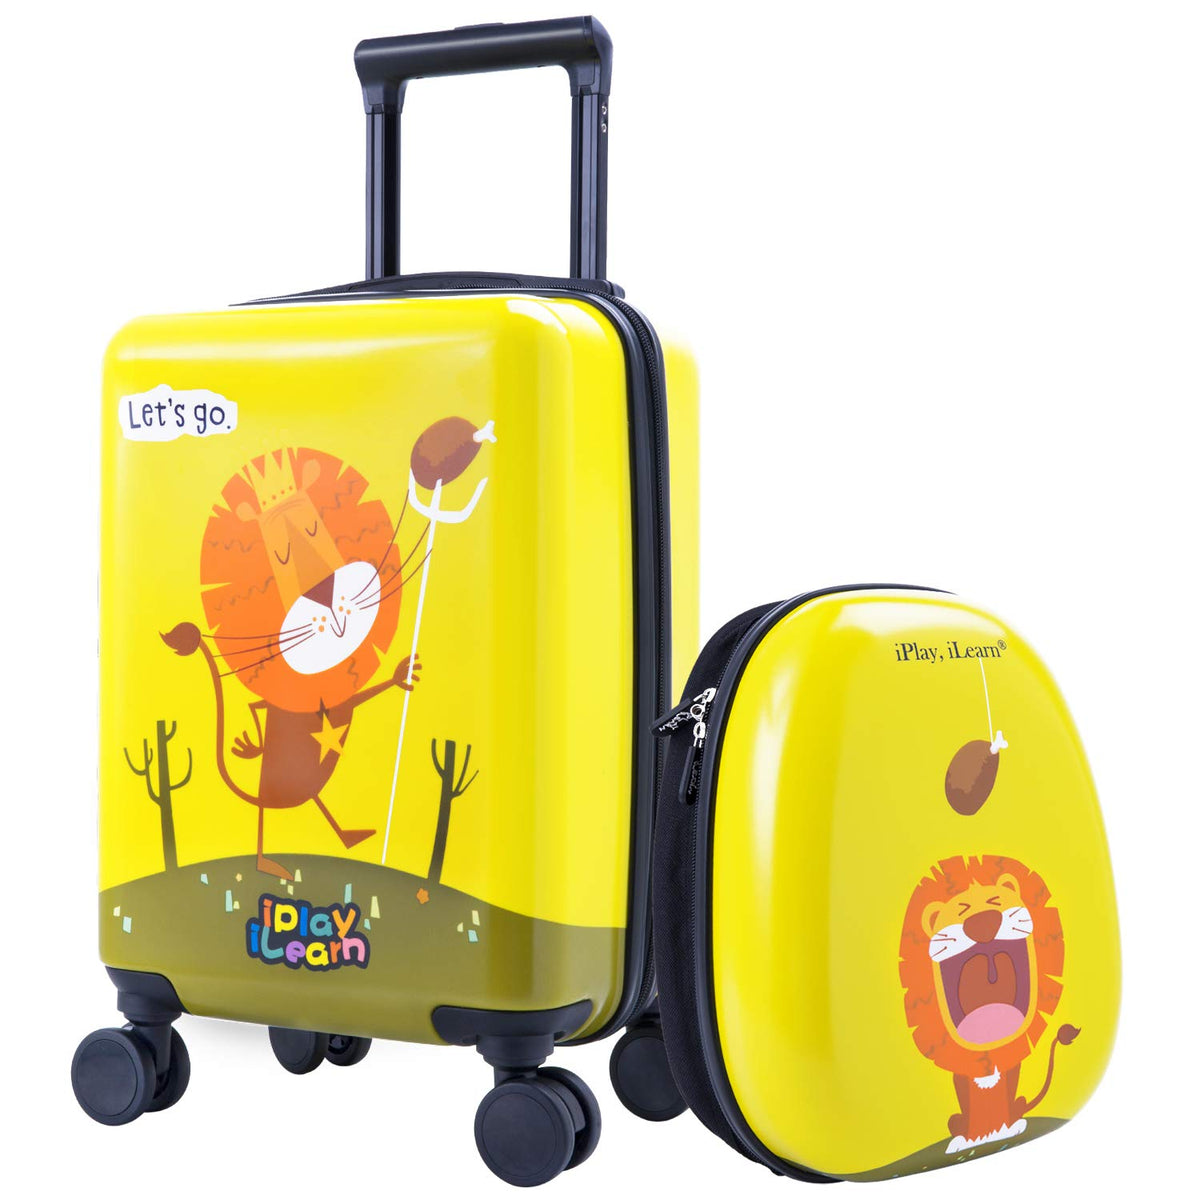 iPlay, iLearn Kids Lion Luggage Set Carry on Suitcase with Backpack – iPlay  iLearn Toys